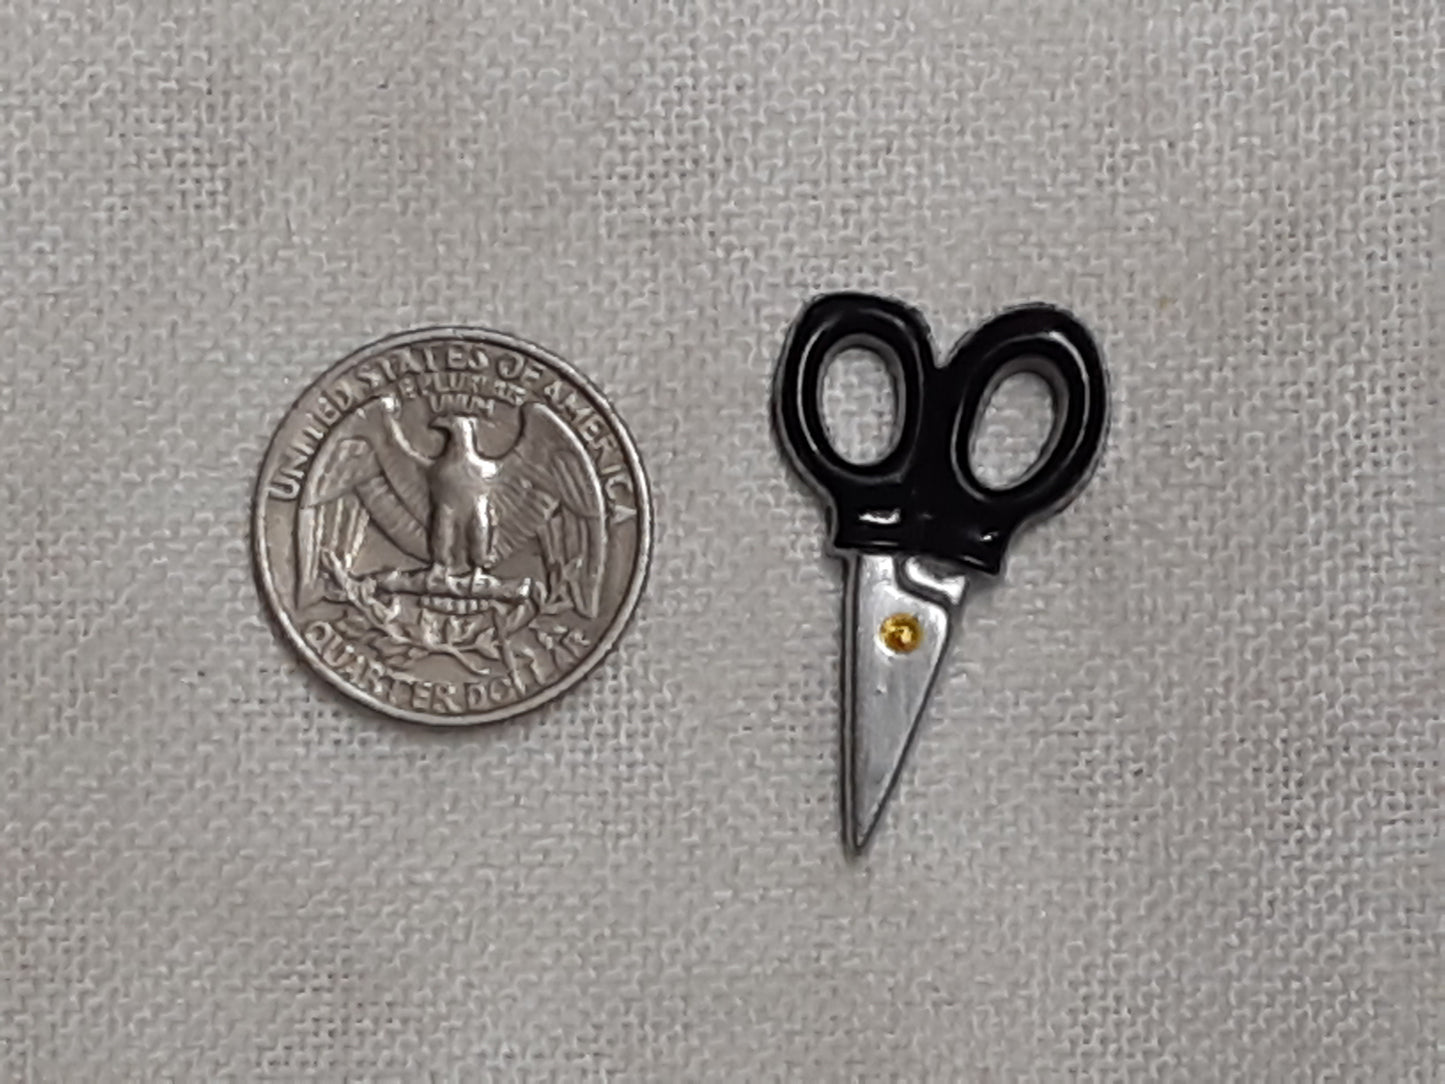 Sewing Notions needle minders